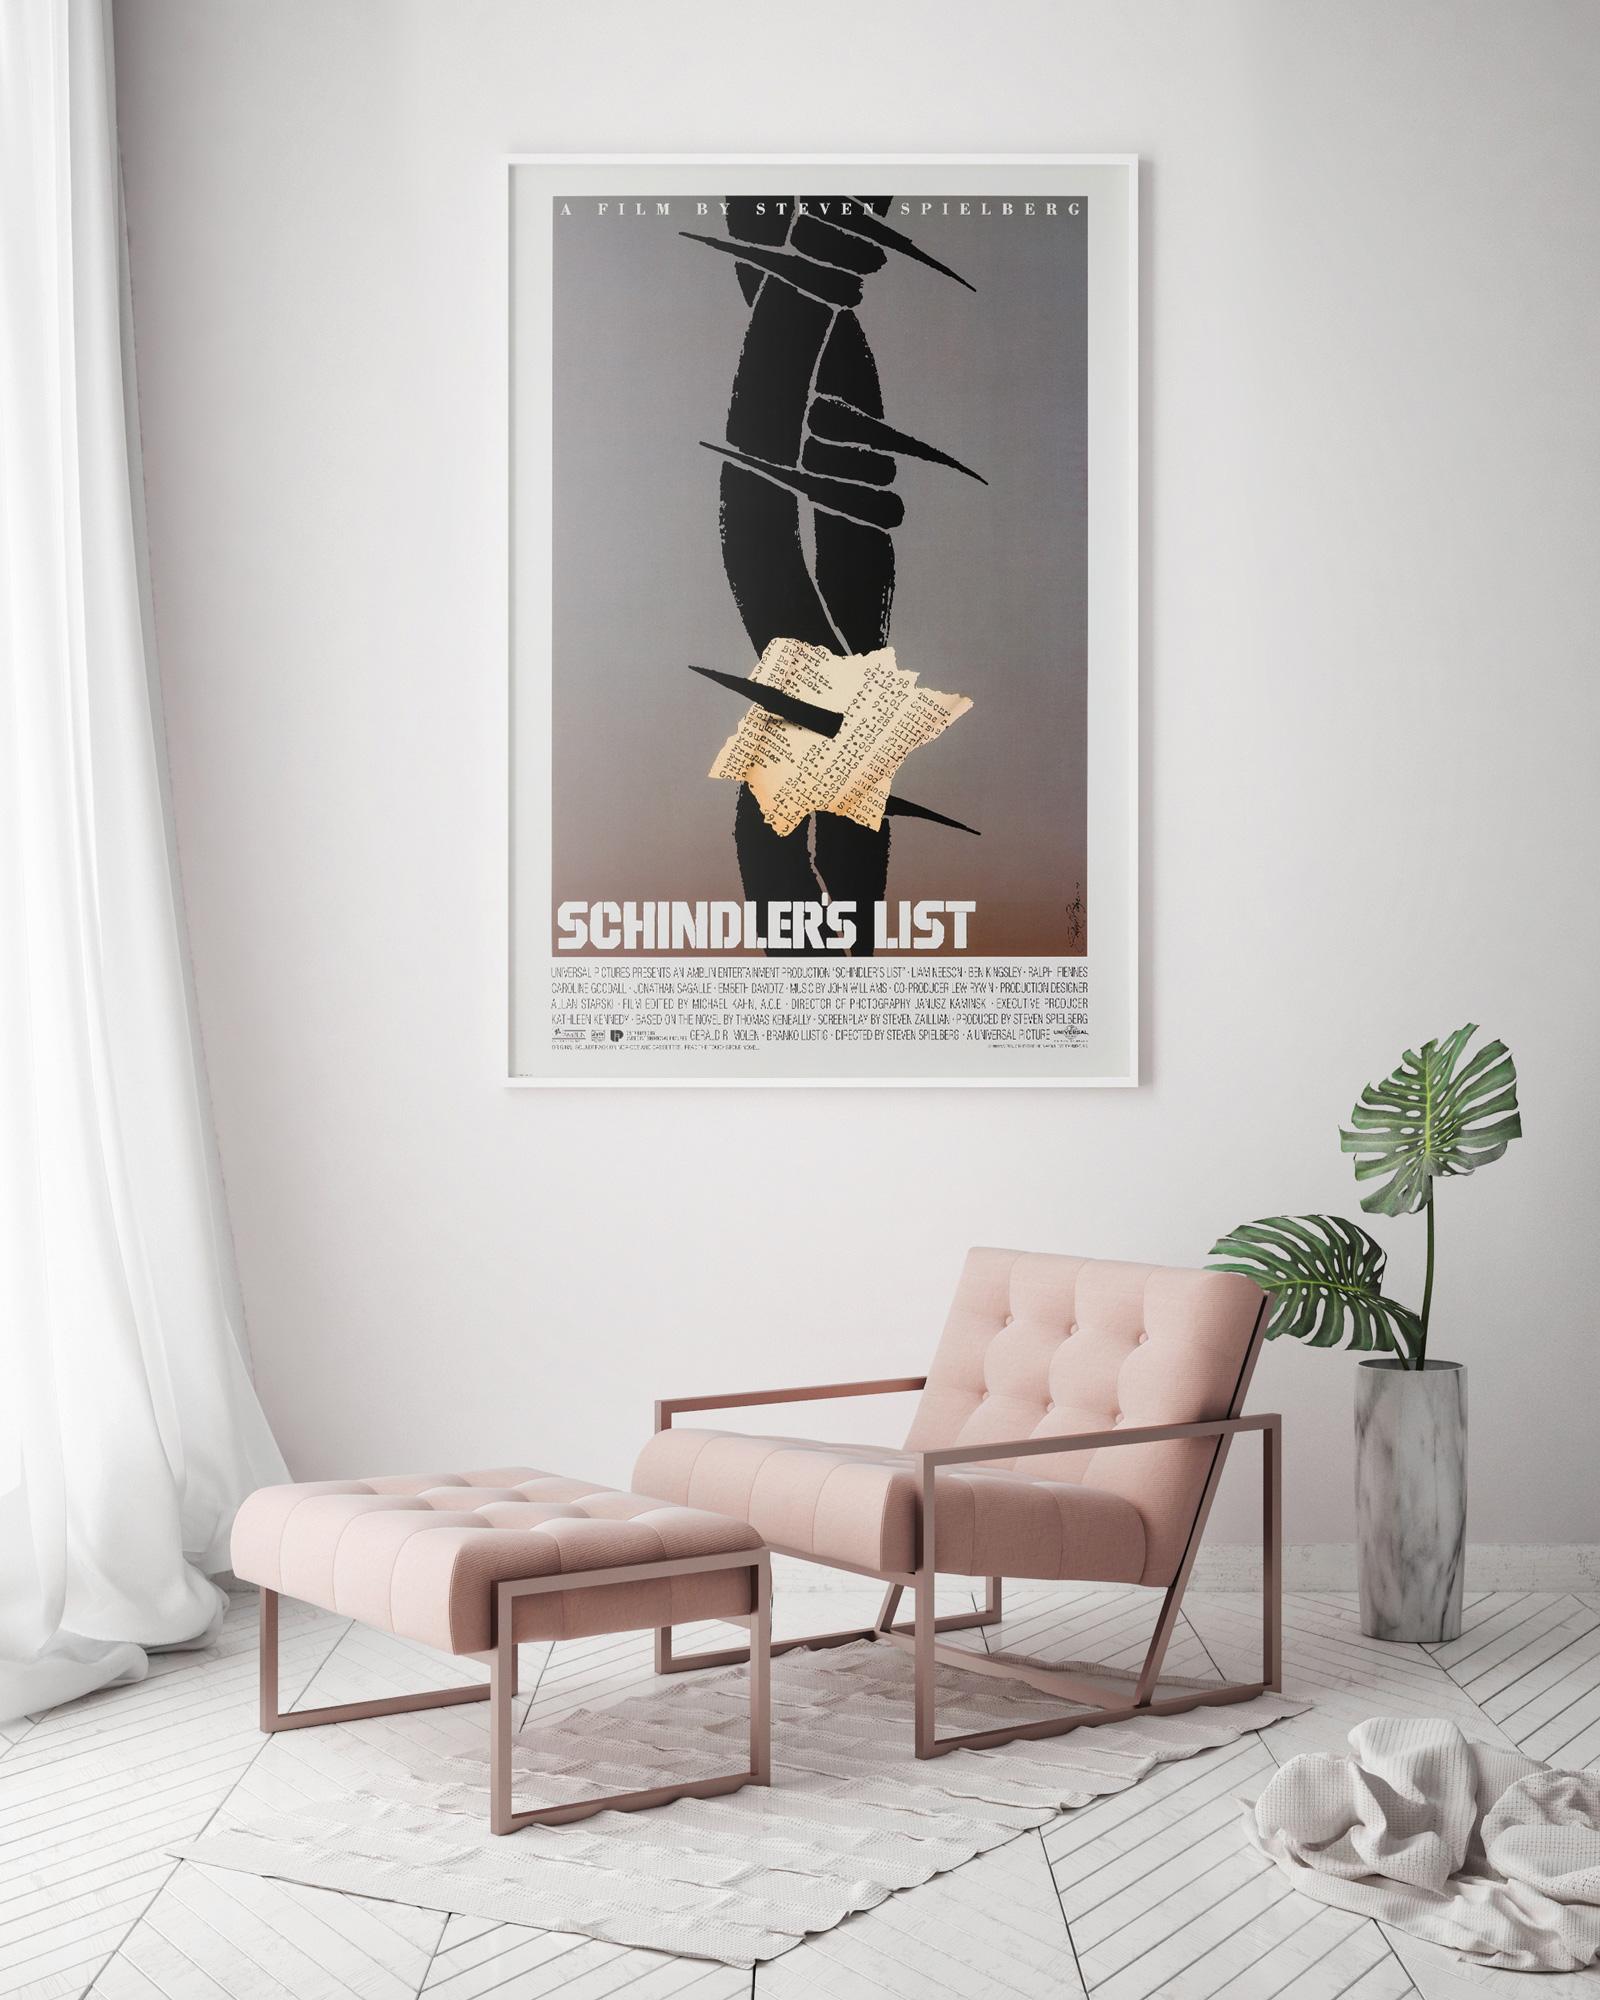 Saul Bass submitted this design for Schindler's List but, incredibly, it was not chosen for the movie.

However some US 1 Sheets were printed in limited quantity (believed approx. 200) to be given to studio insiders. This is an extremely rare